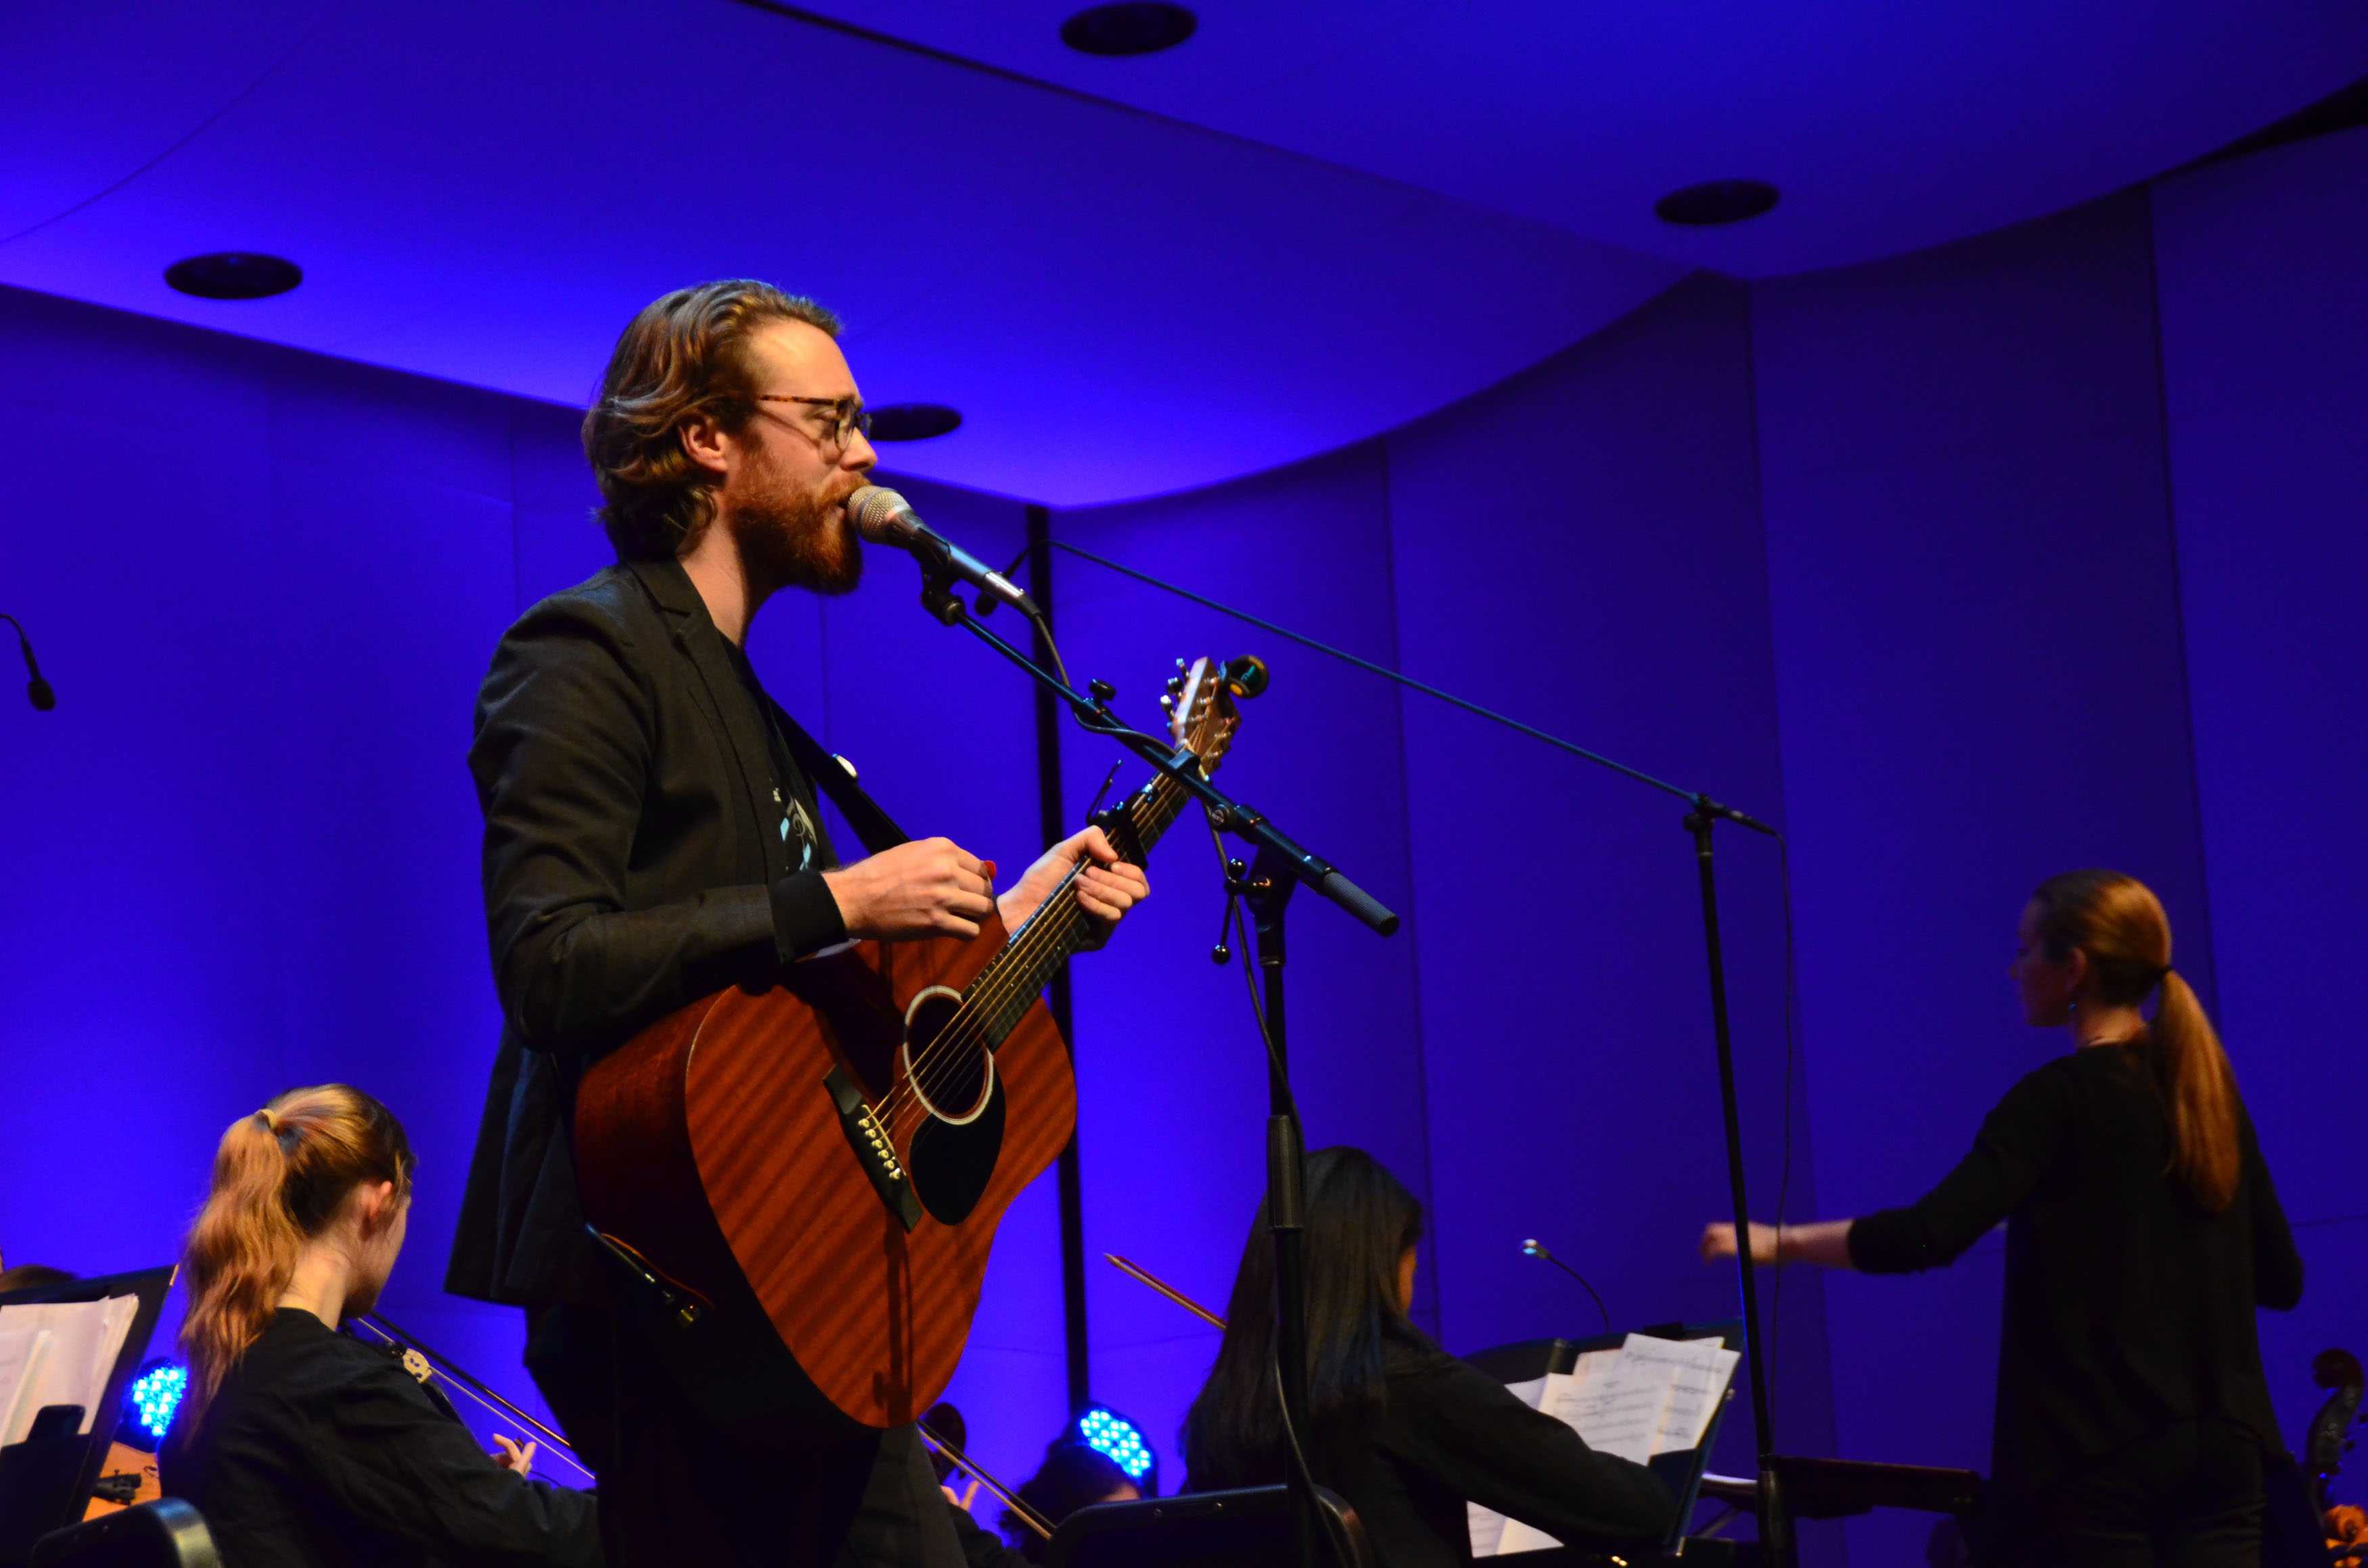 Jeremy+Messersmith+performs+at+Orchestra+Spotlight+Concert